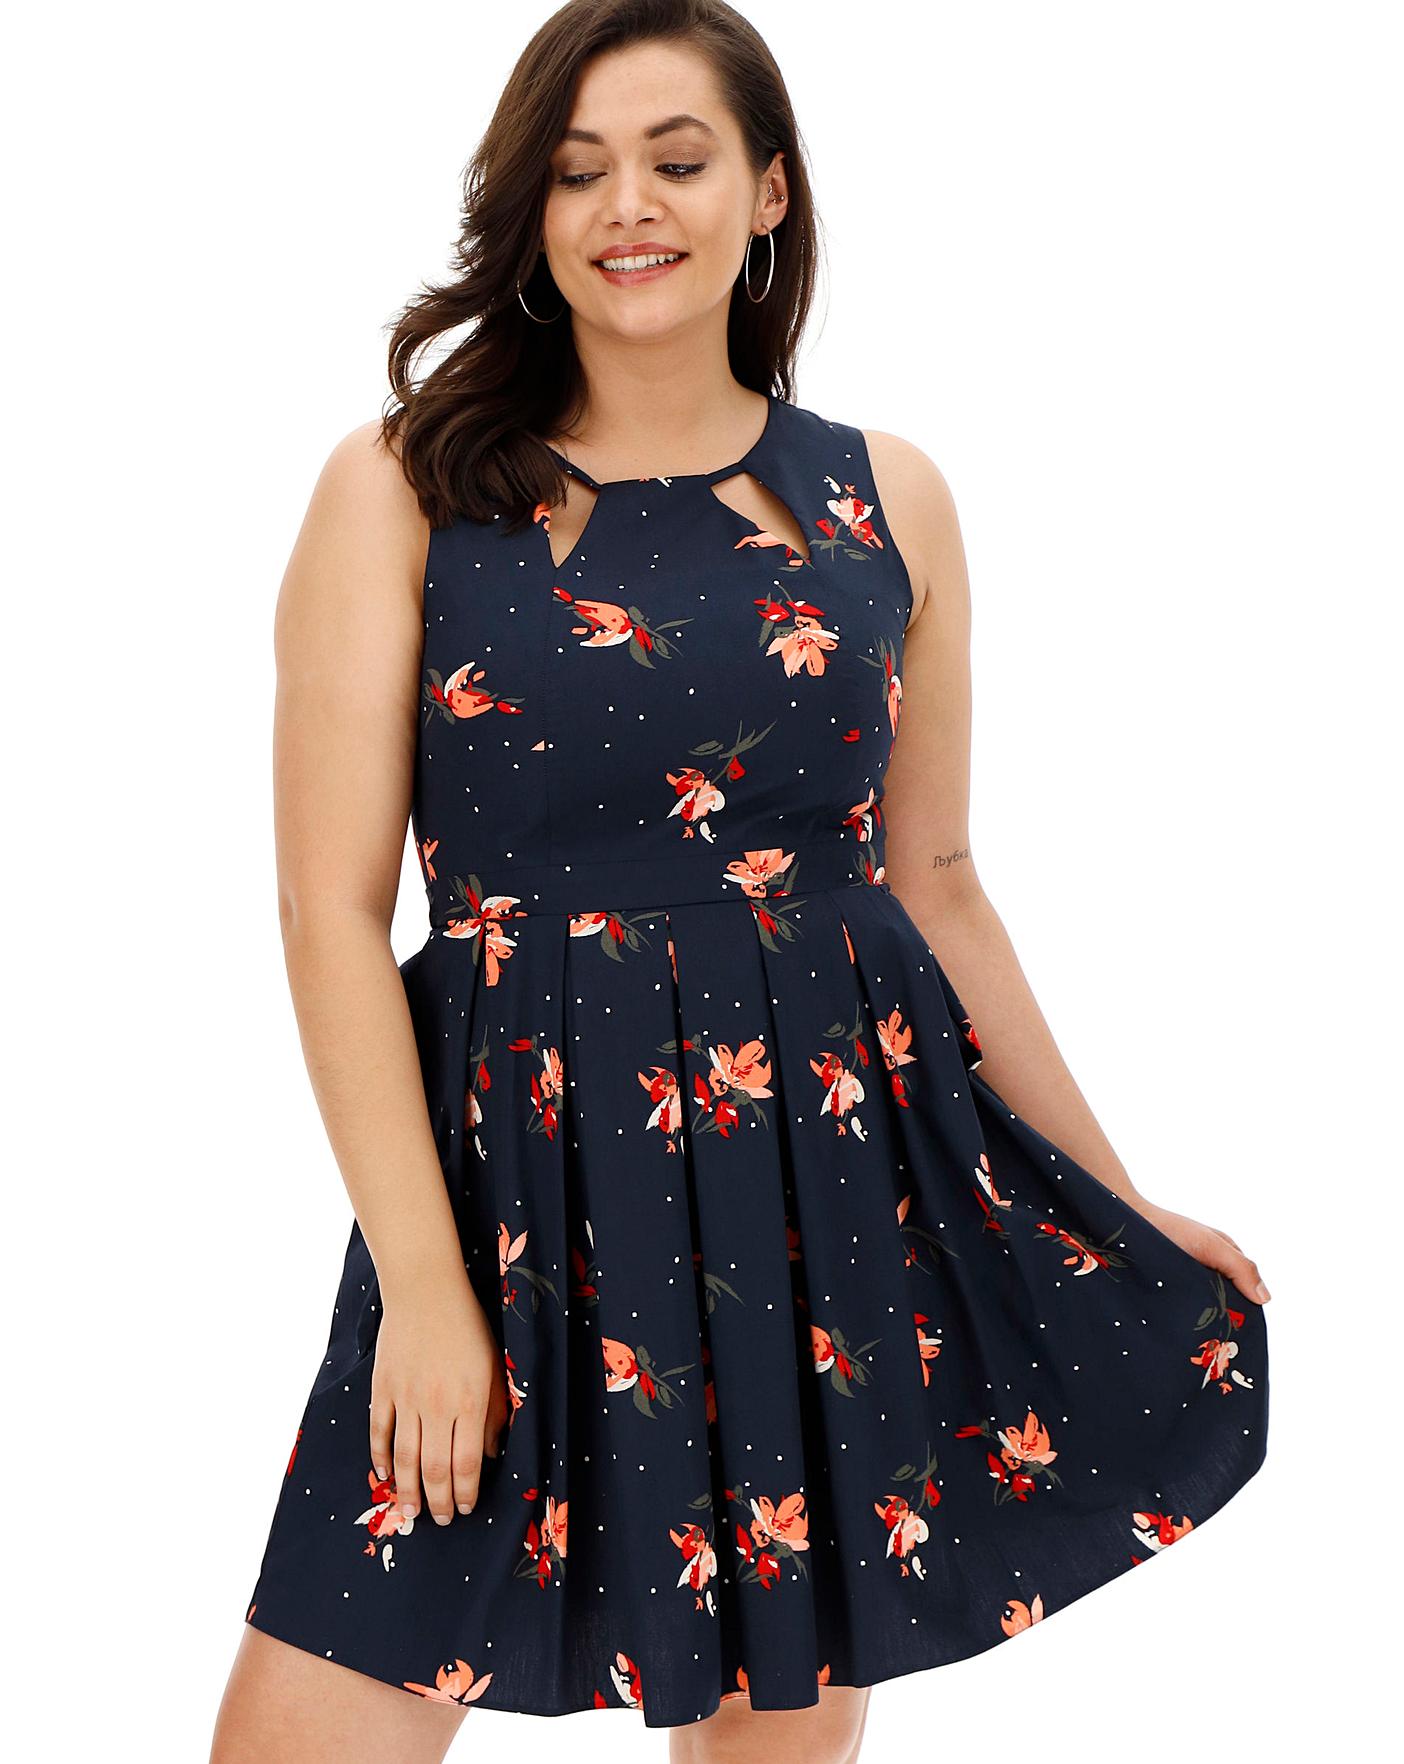 Apricot Floral Pleated Skater Dress 